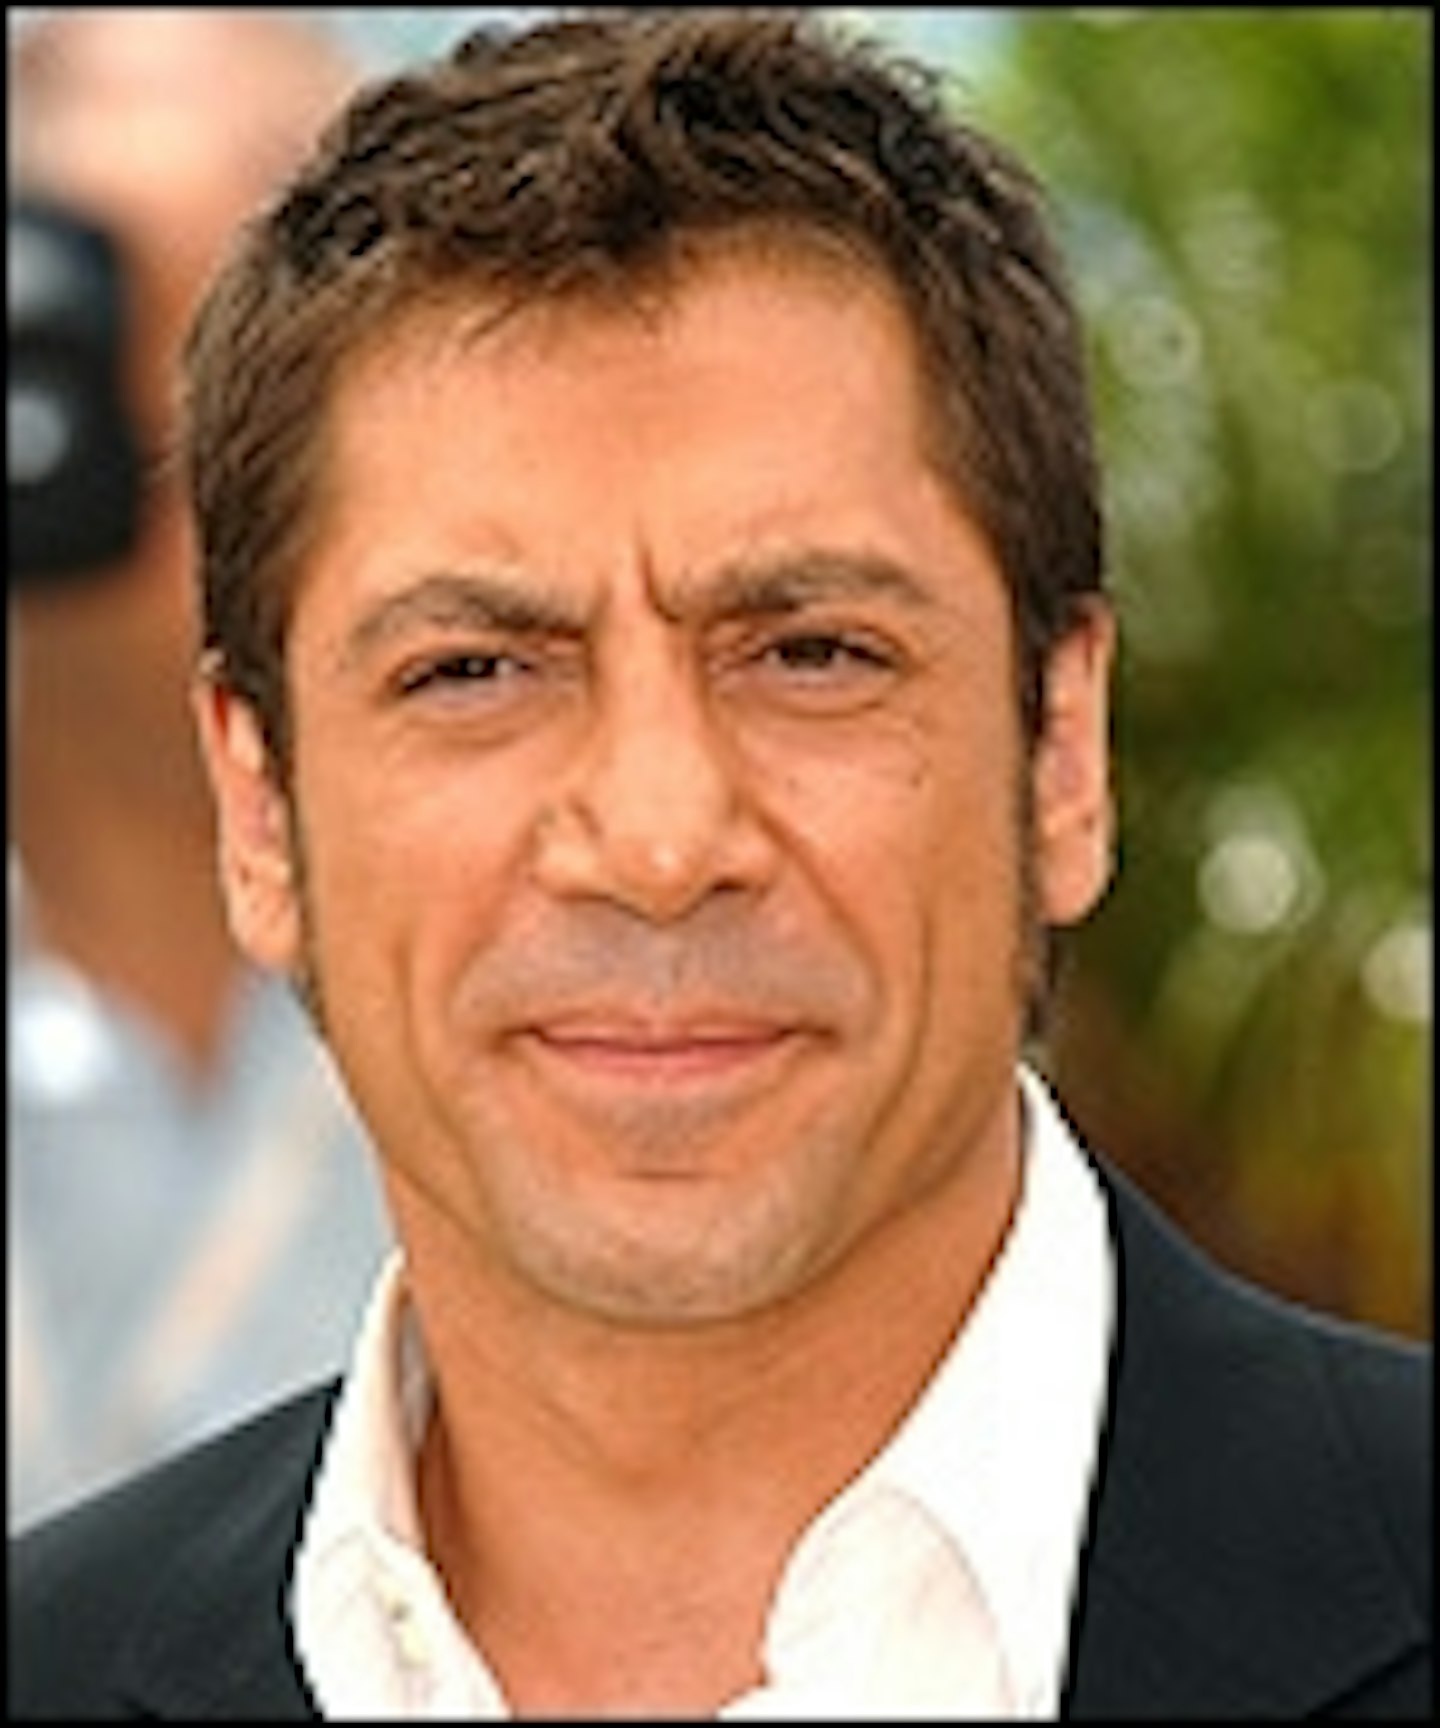 Bardem In Talks For Despicable Me 2